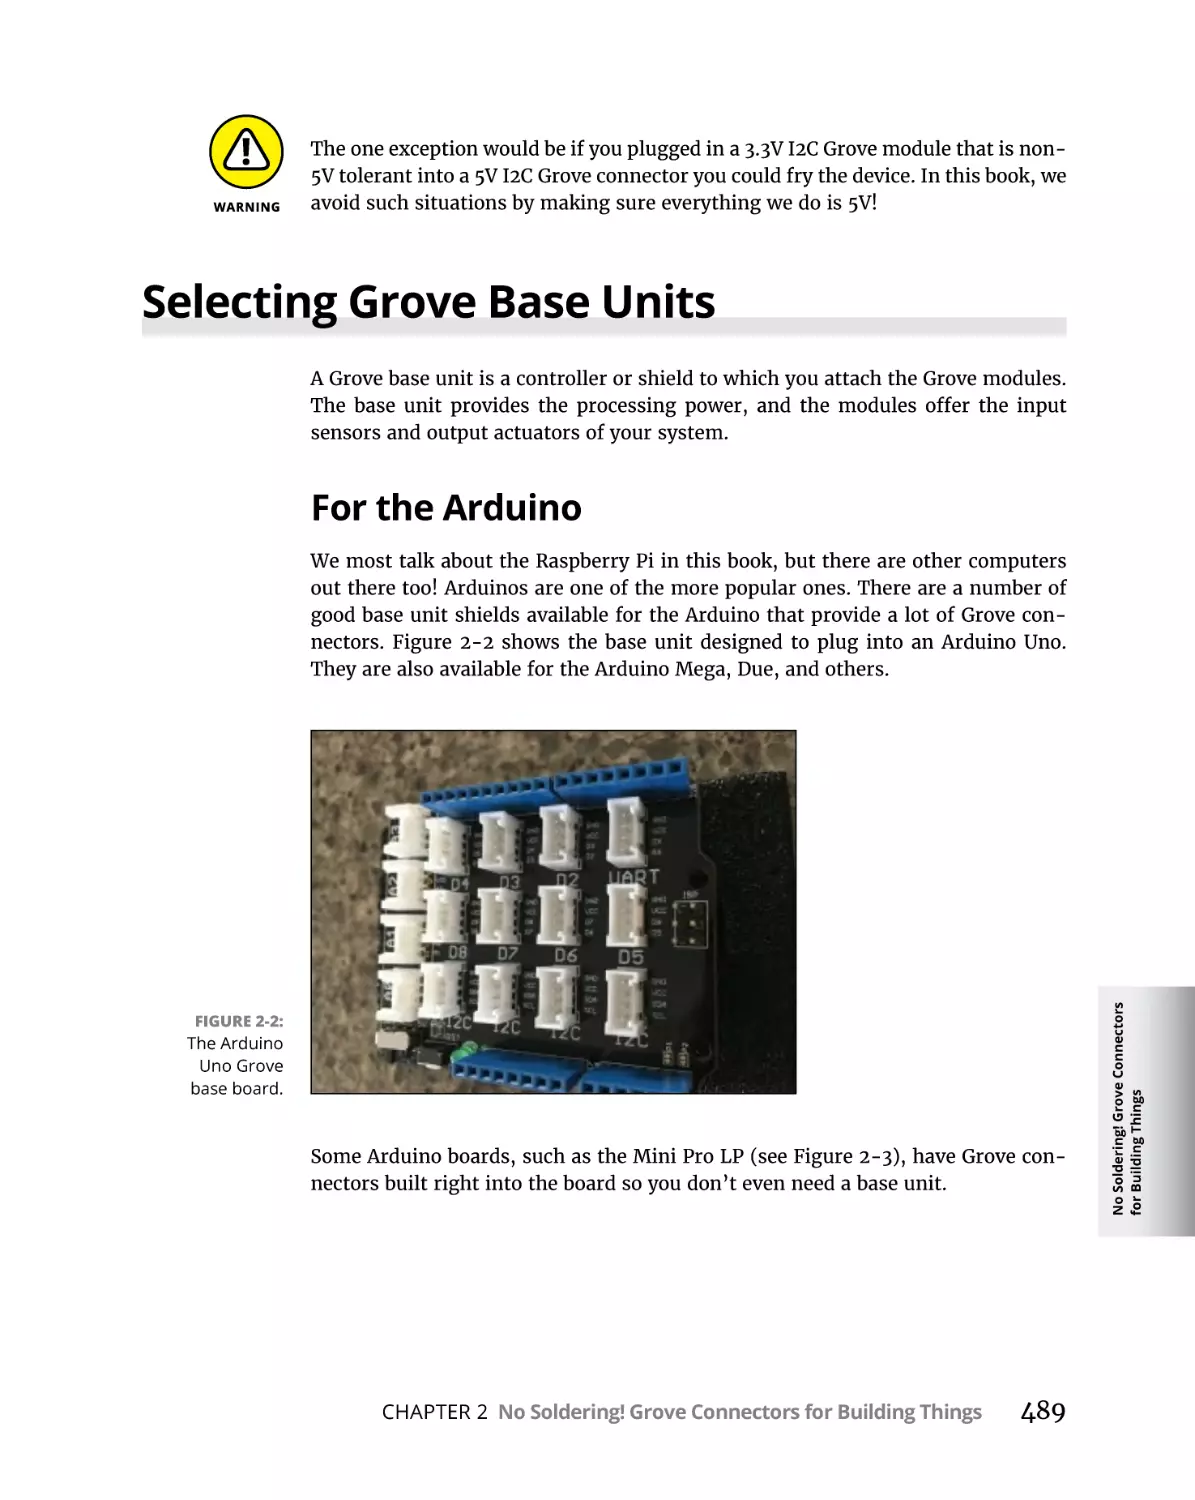 Selecting Grove Base Units
For the Arduino